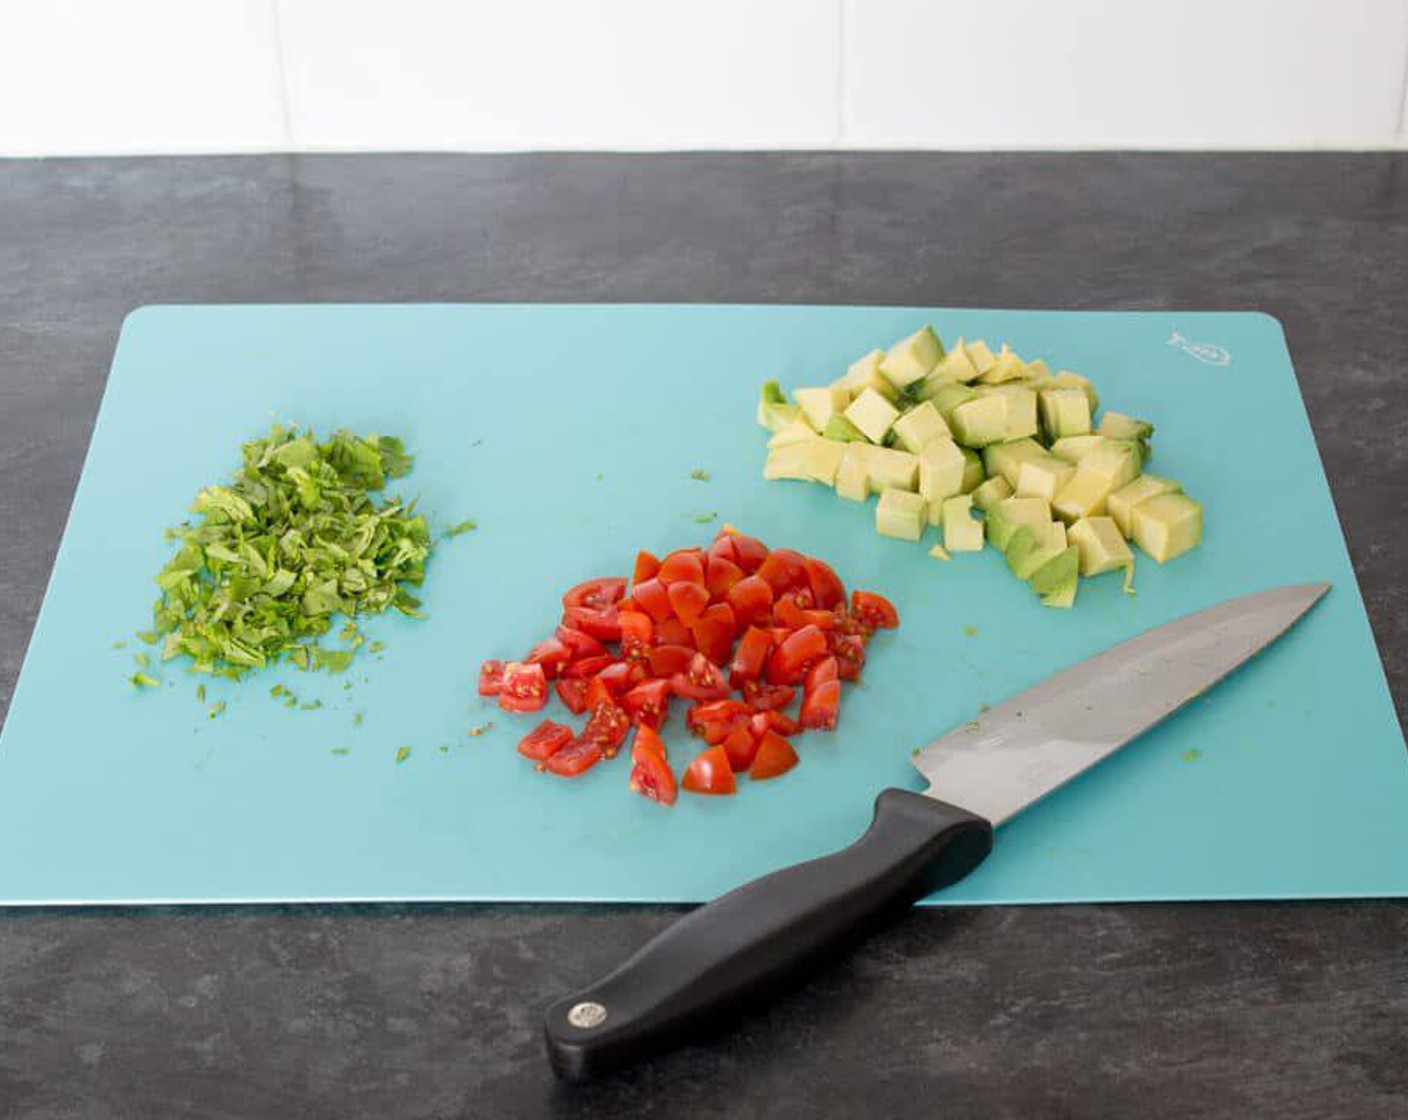 step 1 Halve the Avocado (1) and remove the stone. Cut into quarters, peel off the skin & then chop into cubes. Chop the Tomatoes (2) into small pieces or quarter if you are using cherry tomatoes.